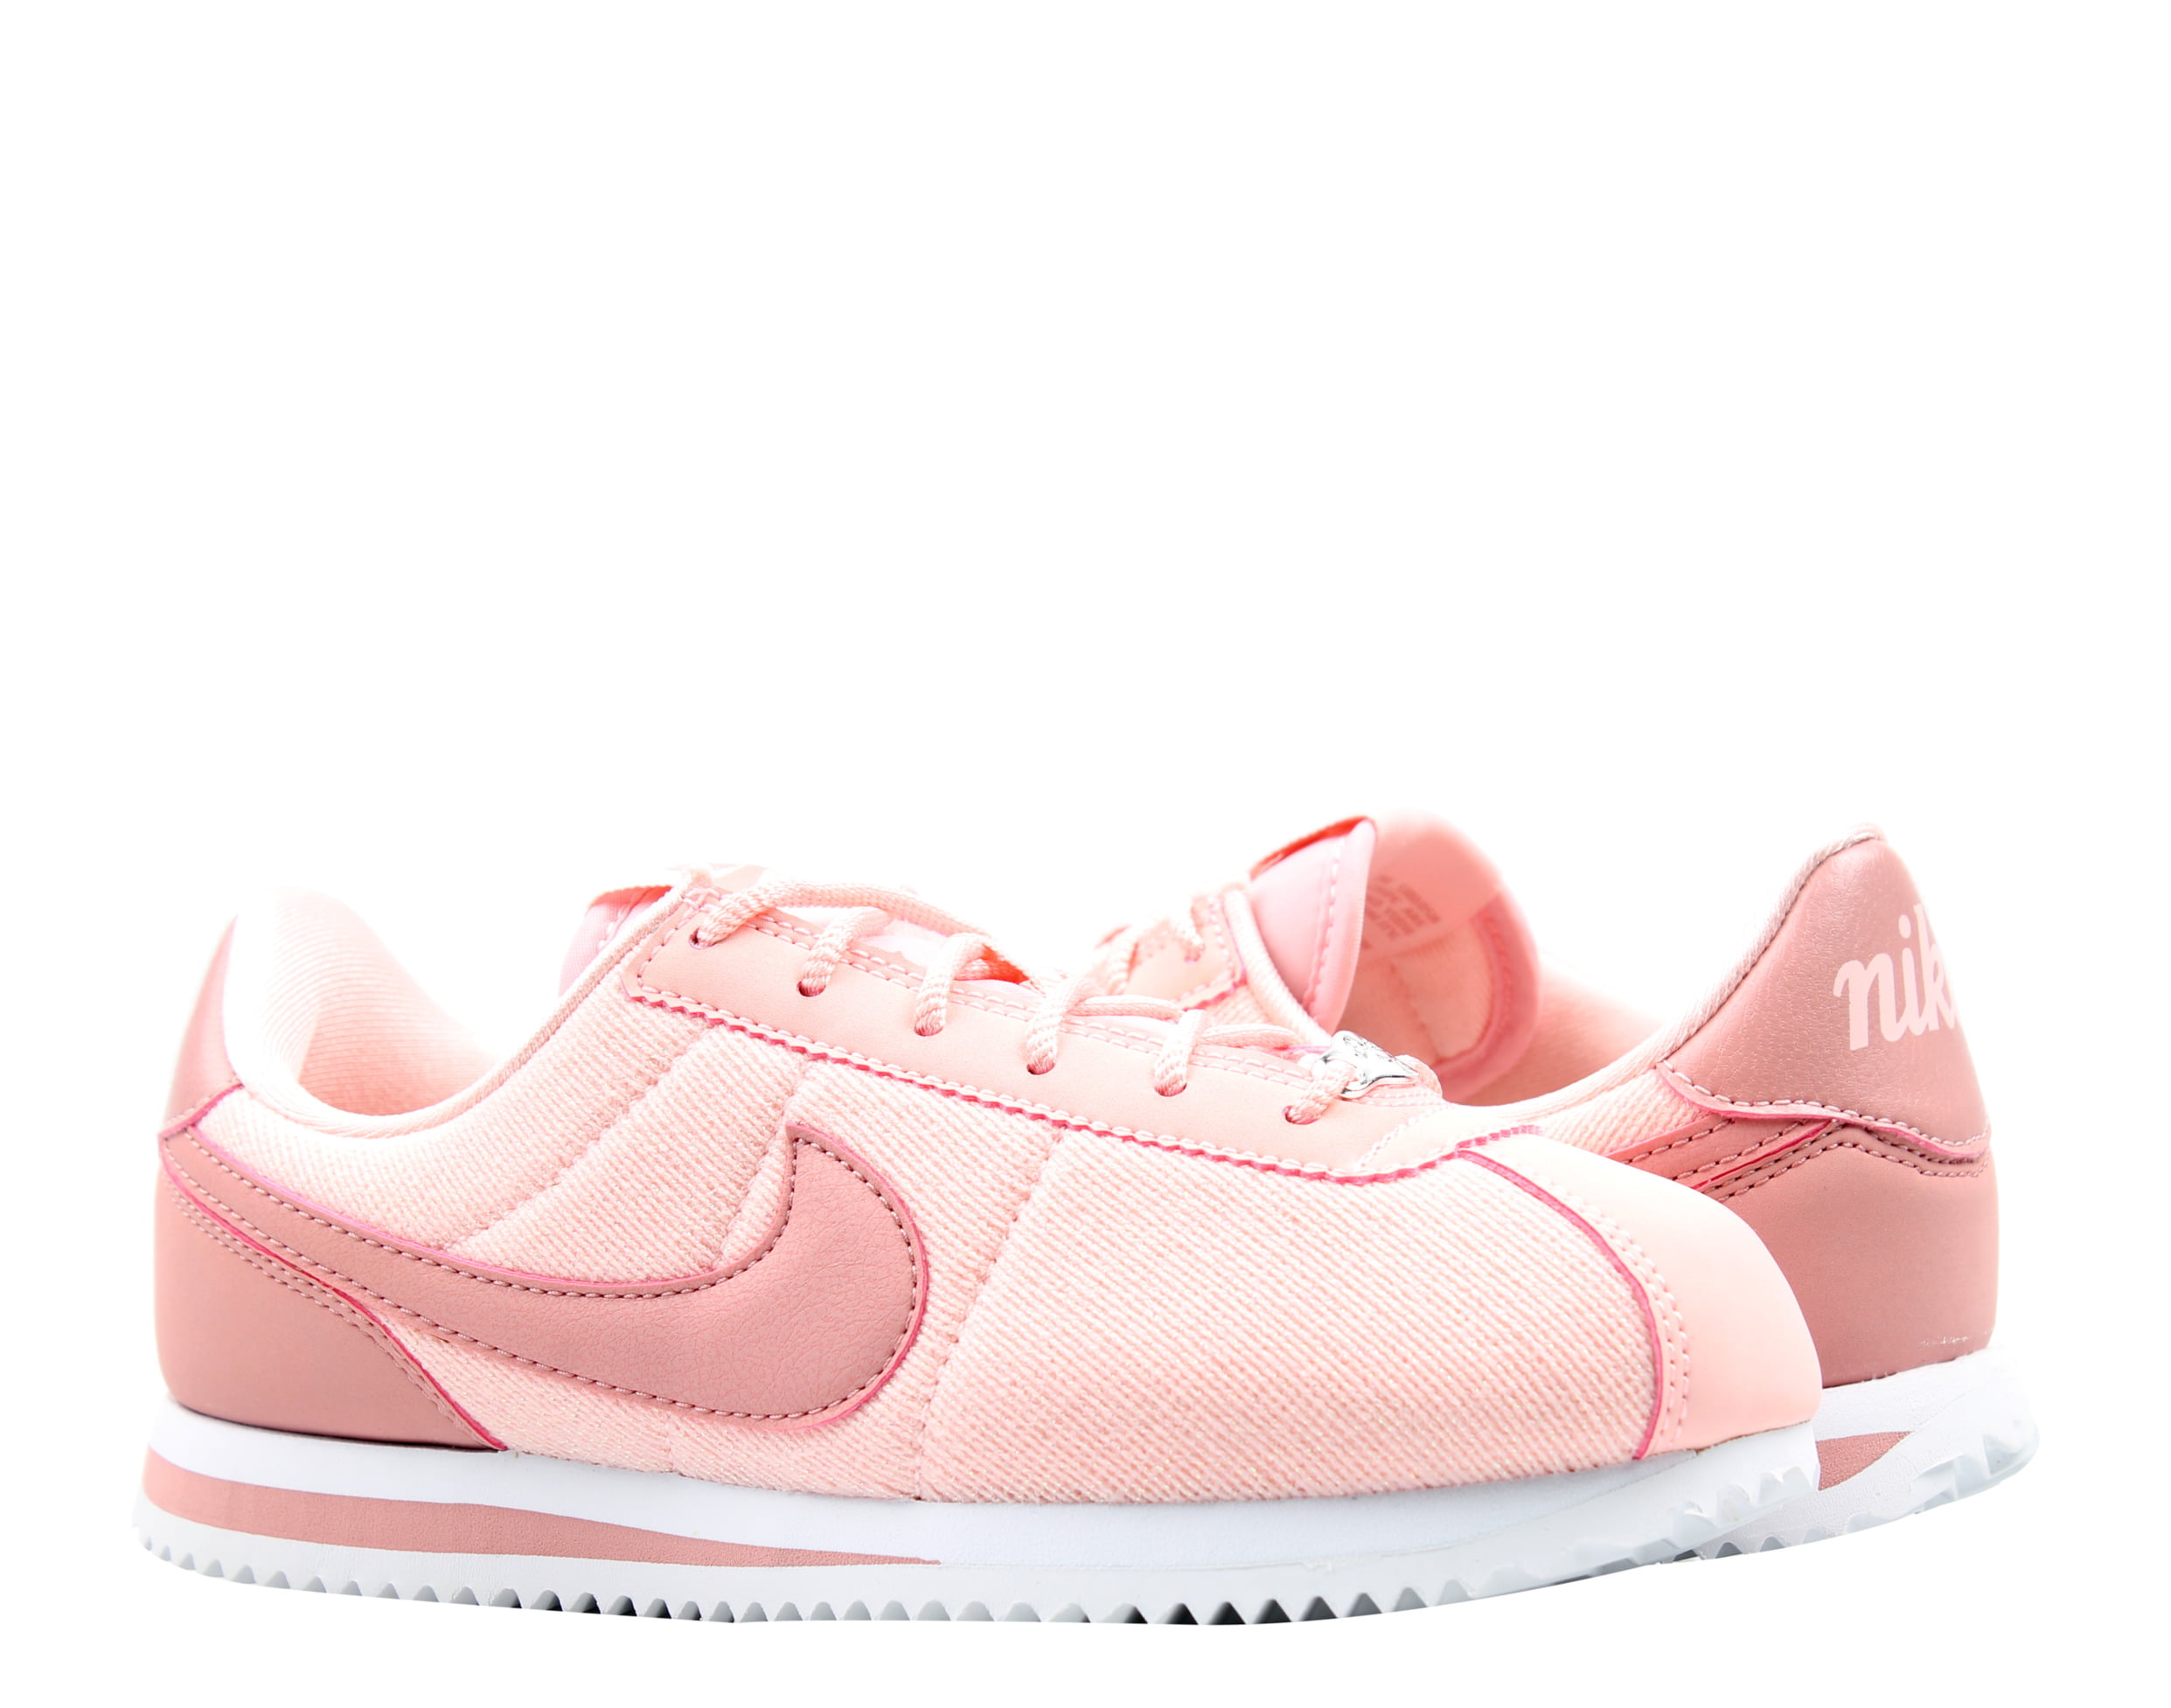 pink and white cortez shoes